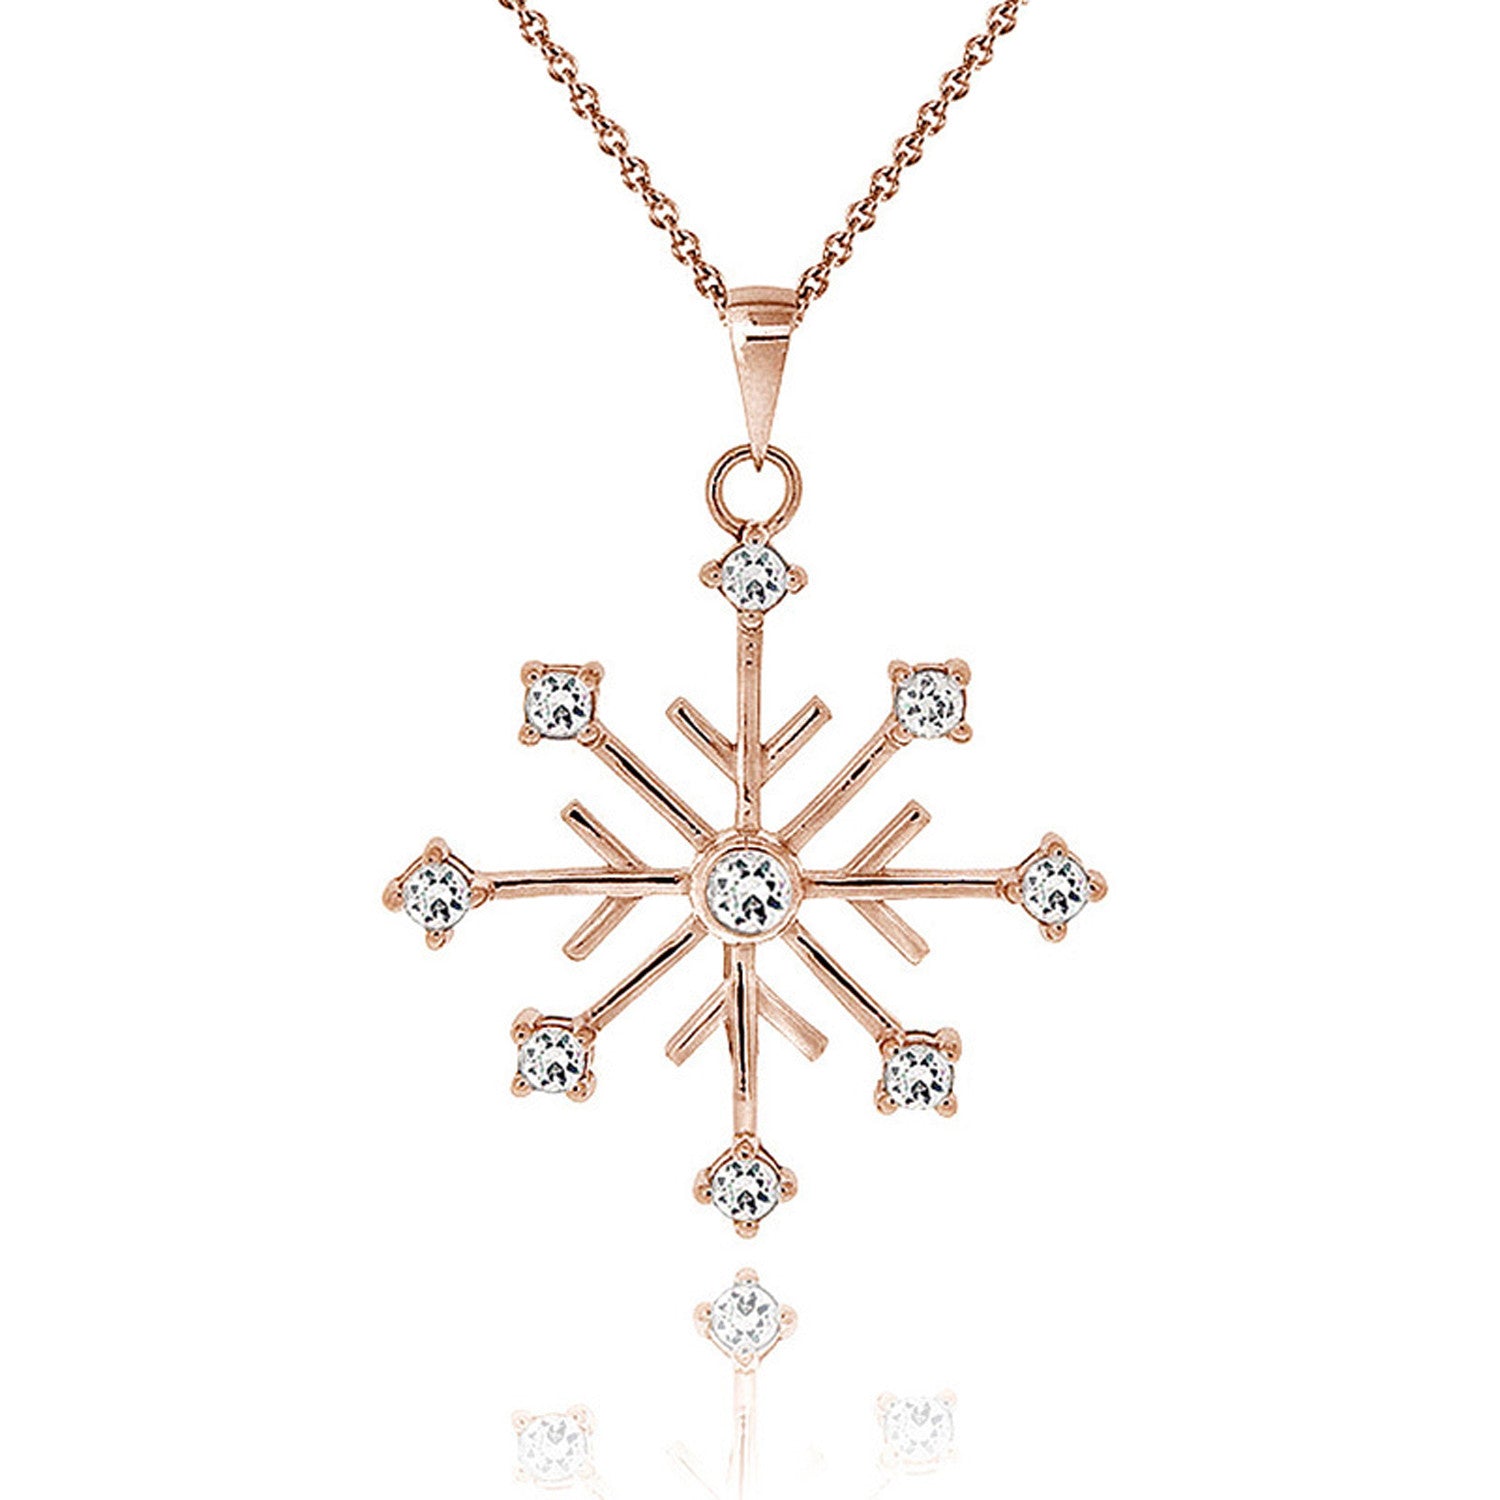 Cubic Zirconia Accented Snowflake Pendant - Rose Gold Overlay